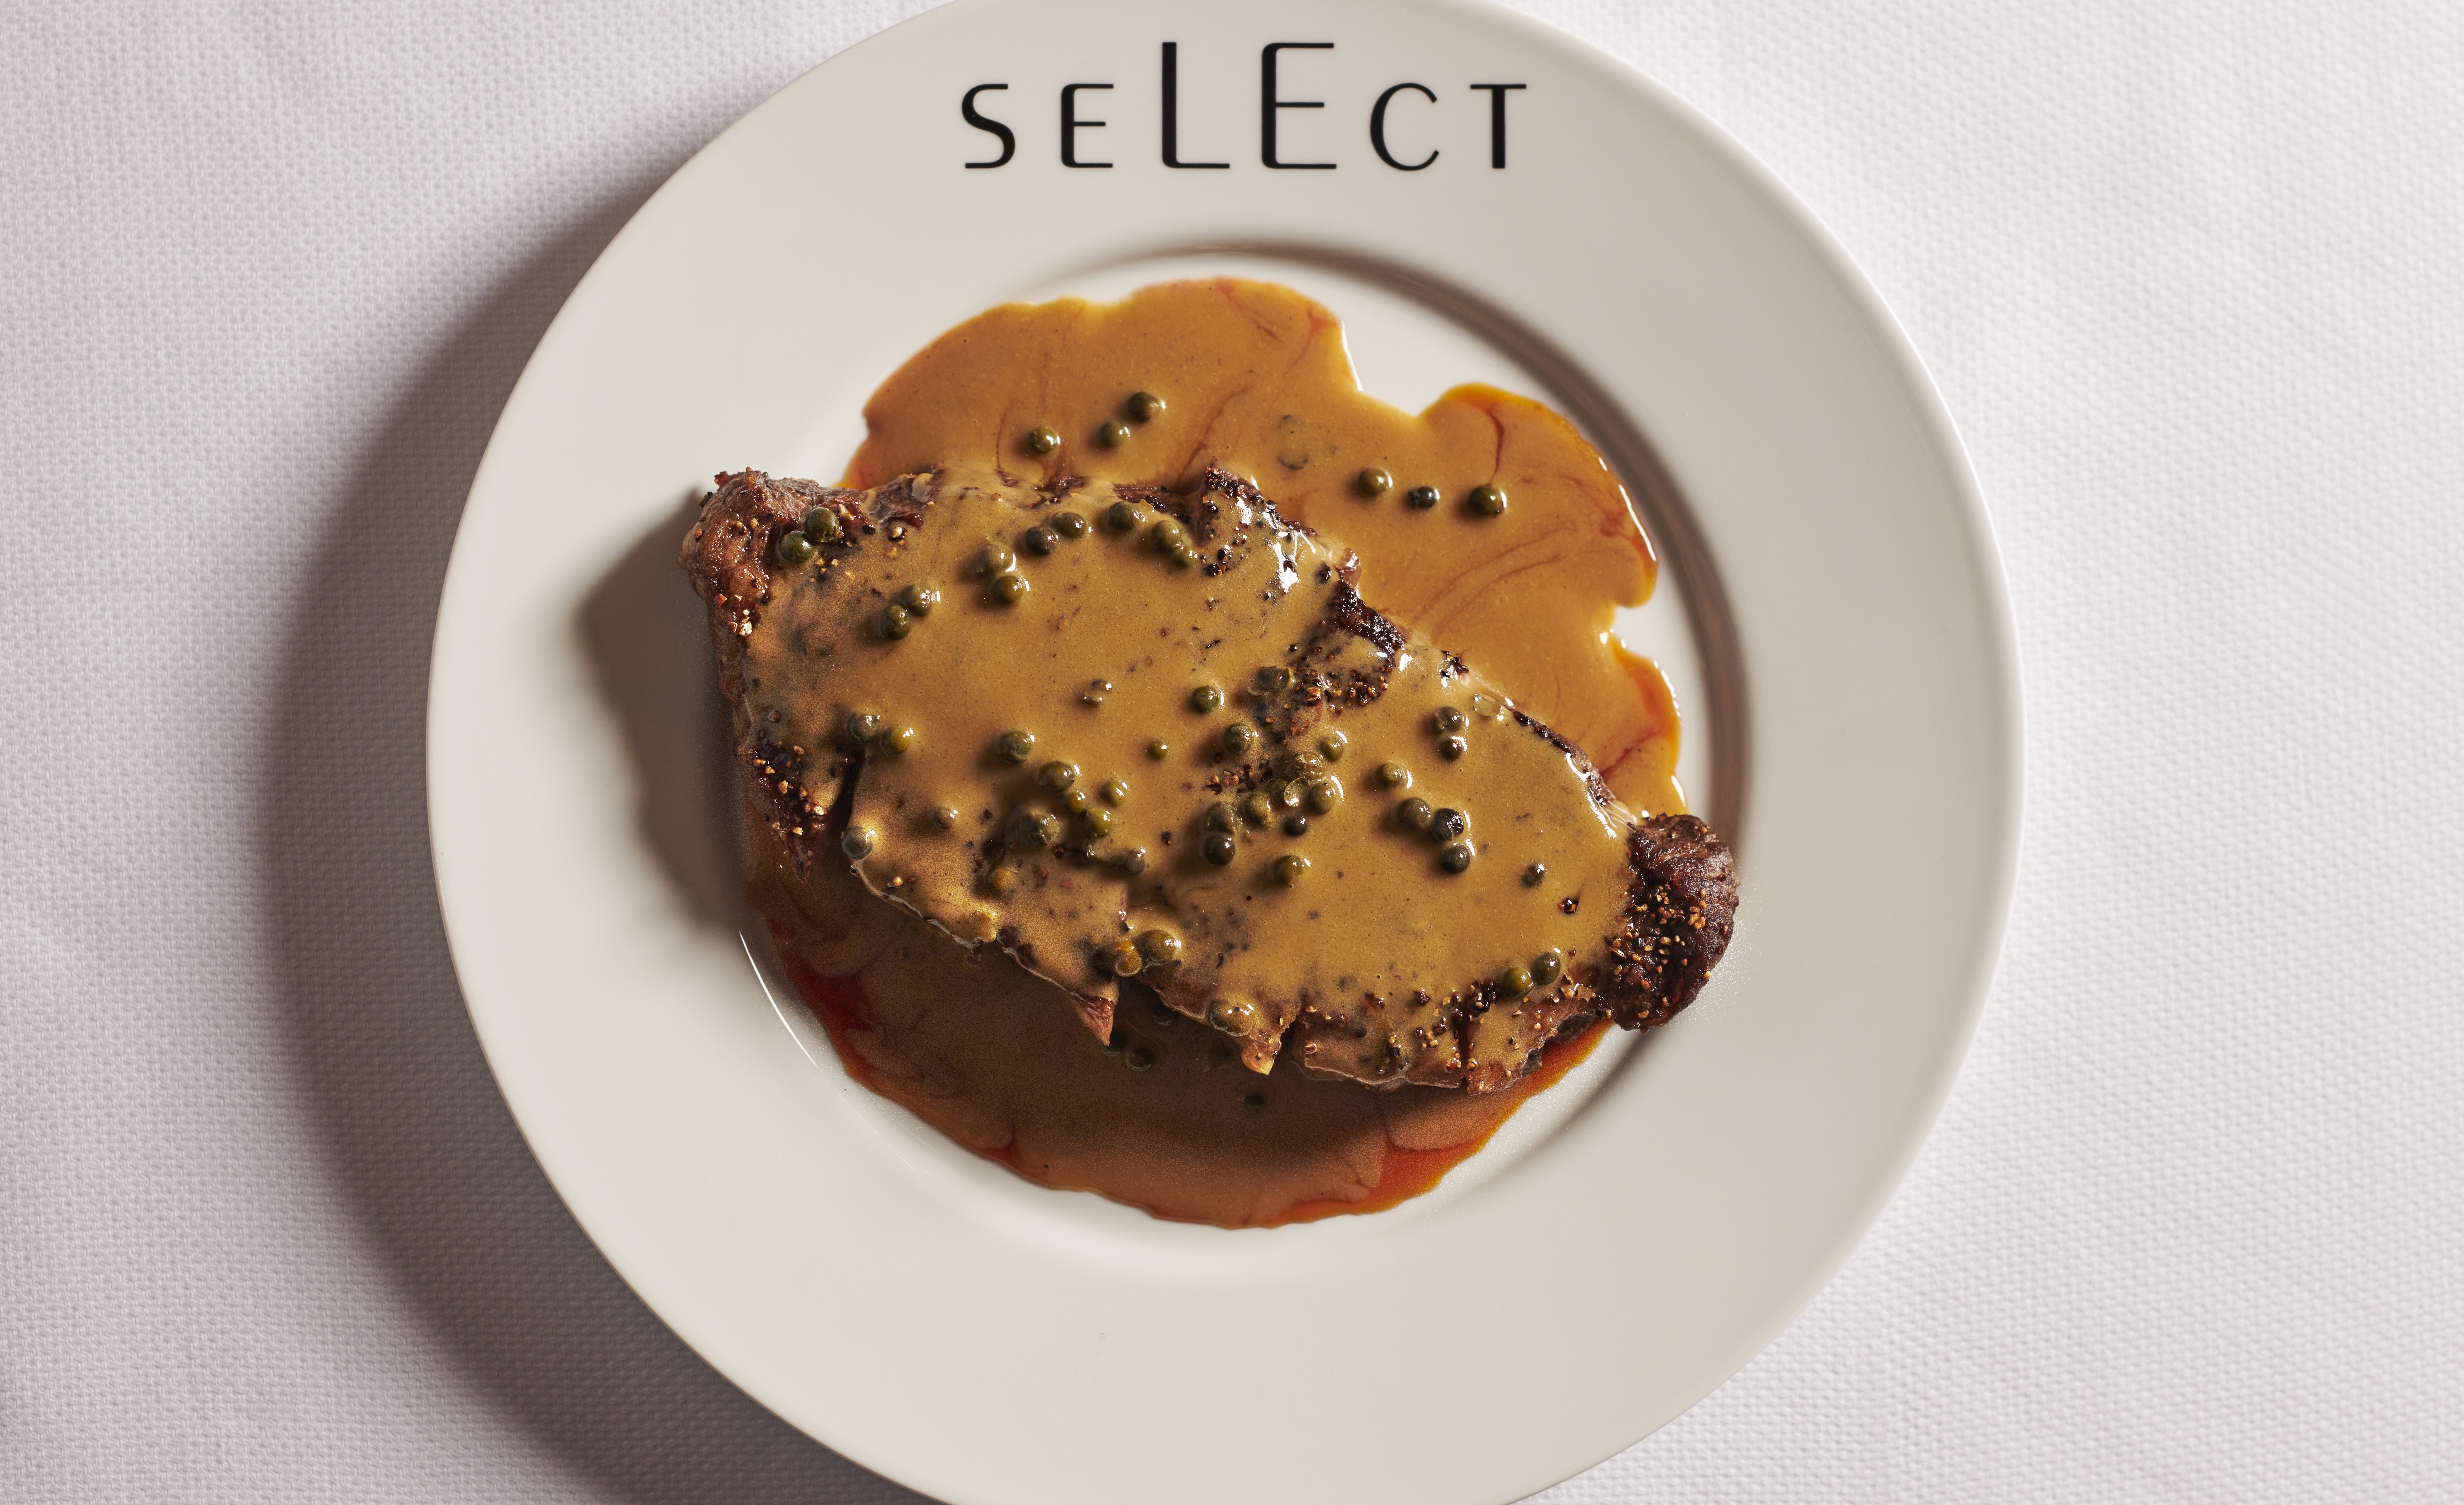 A steak smothered with sauce and peppercorns.